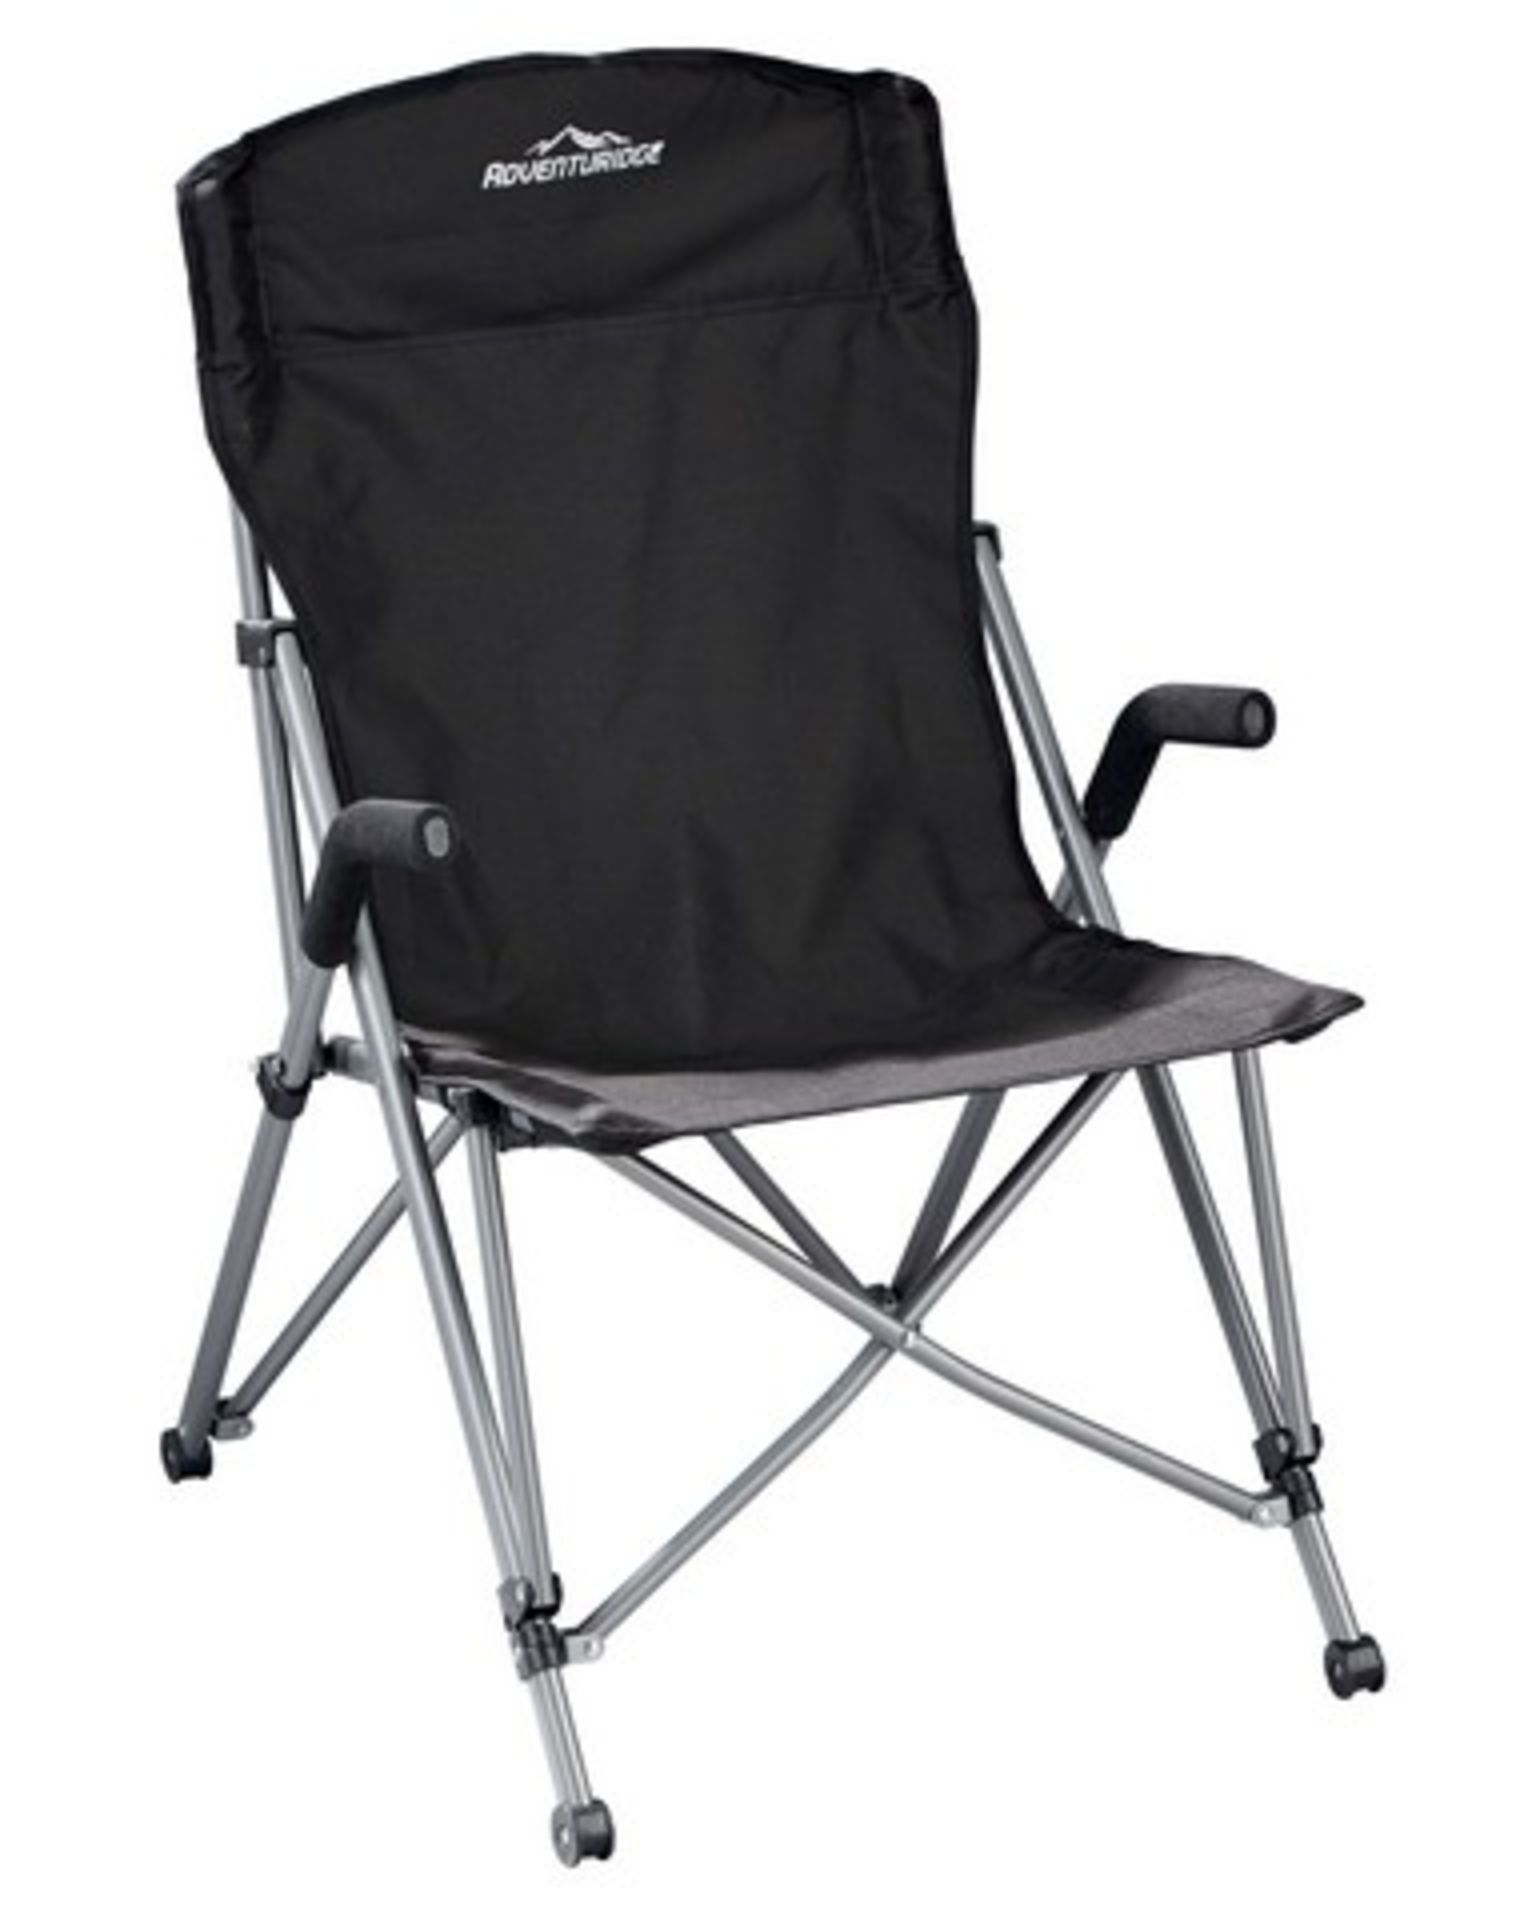 V Brand New Expedition/Tourer Chair In Silver/Black With Carry Case - Lightweight Steel Frame So